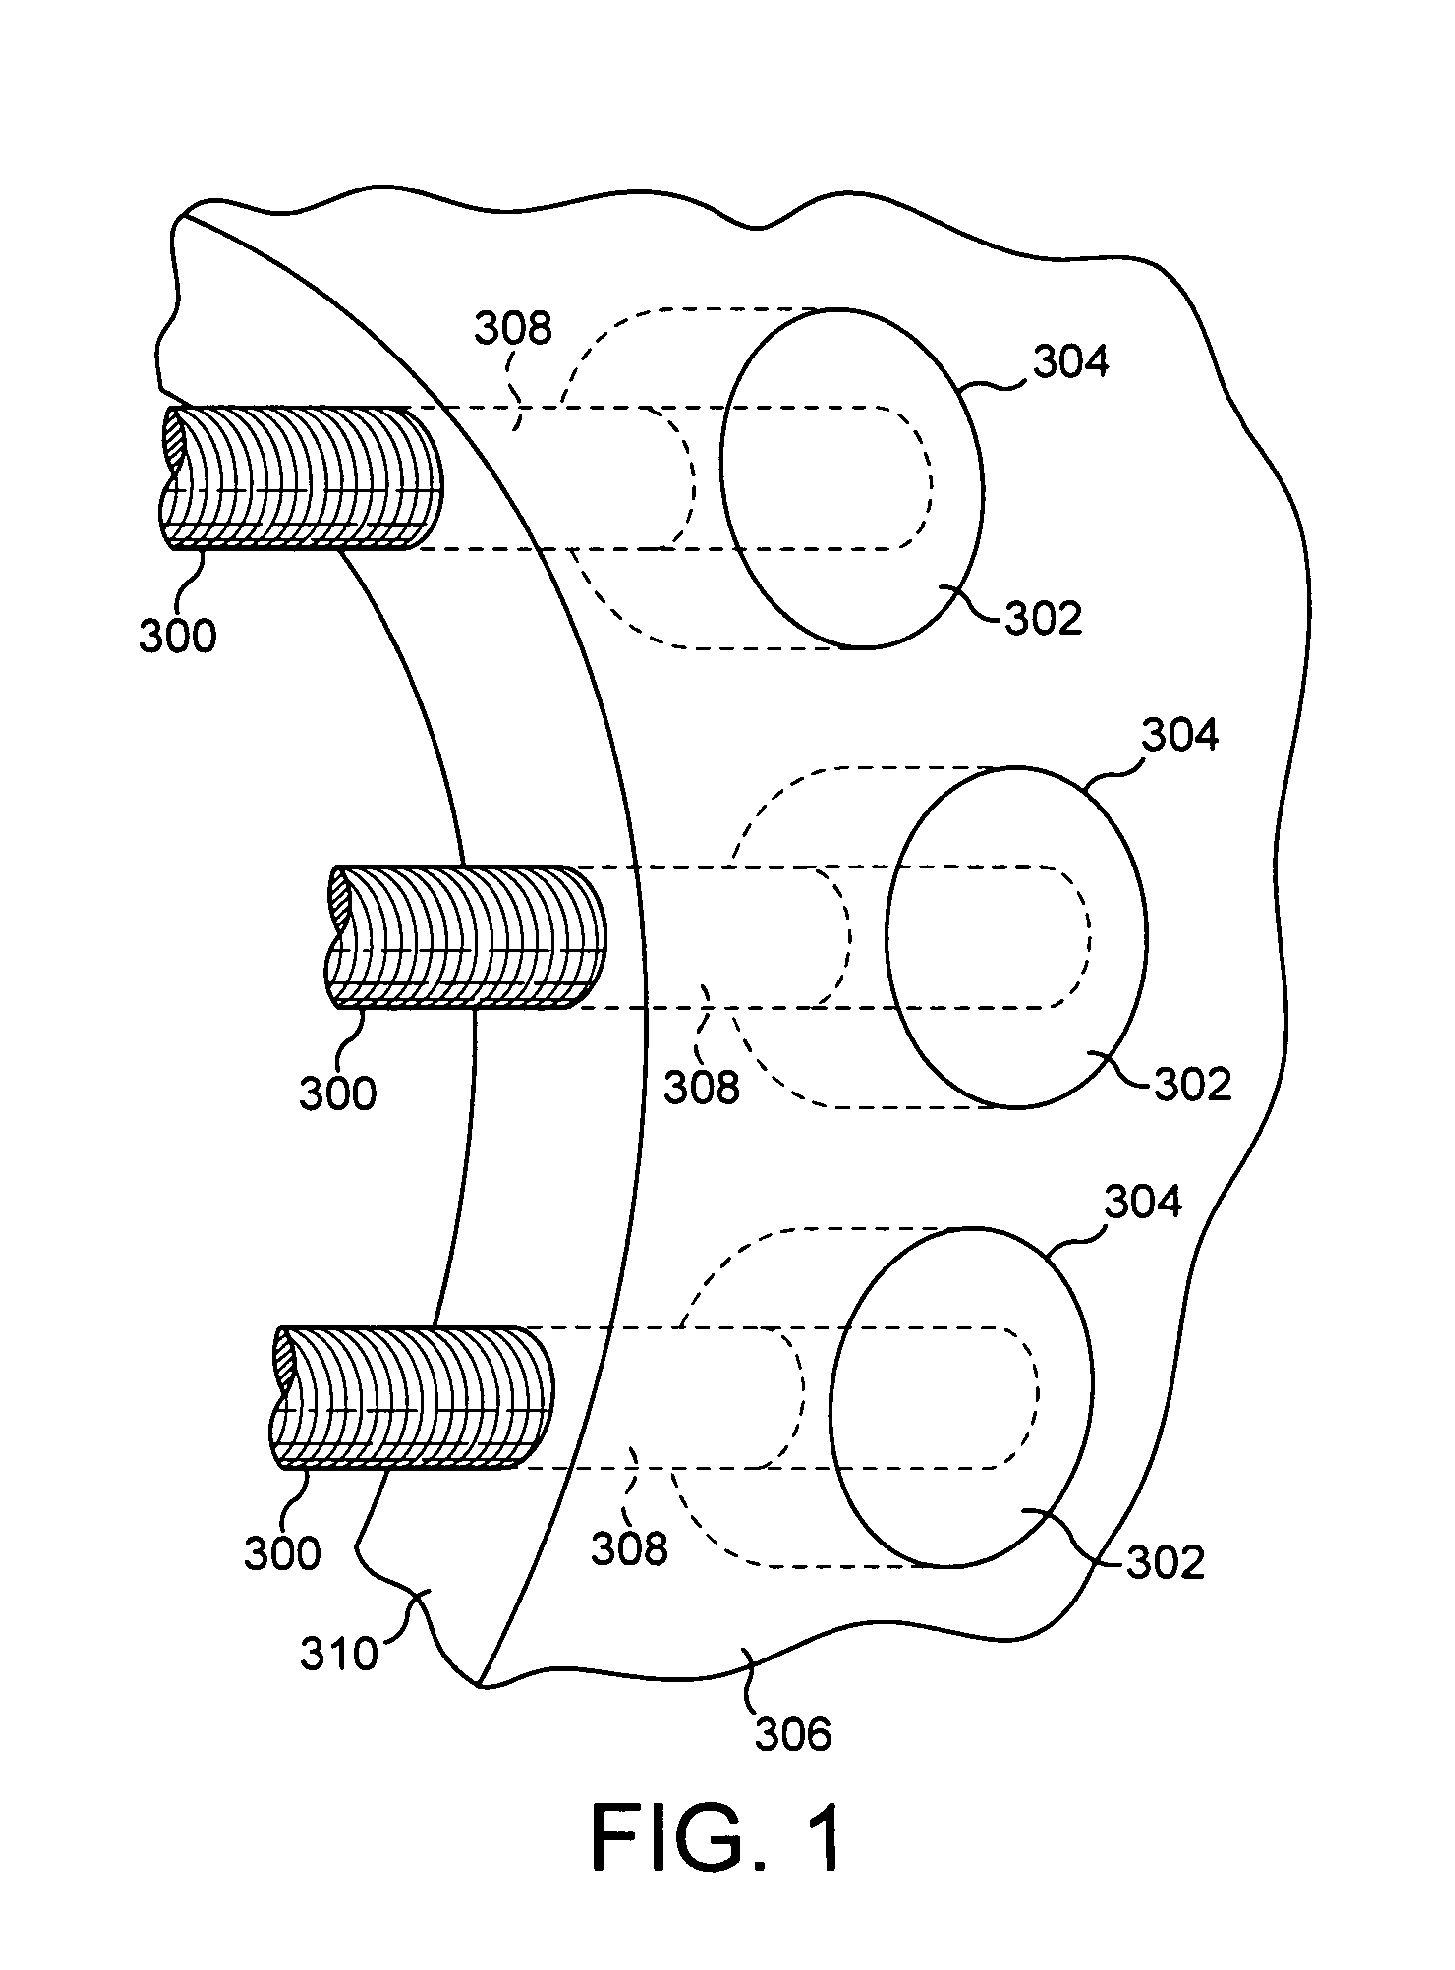 Wind or tidal turbine blade having an attachment